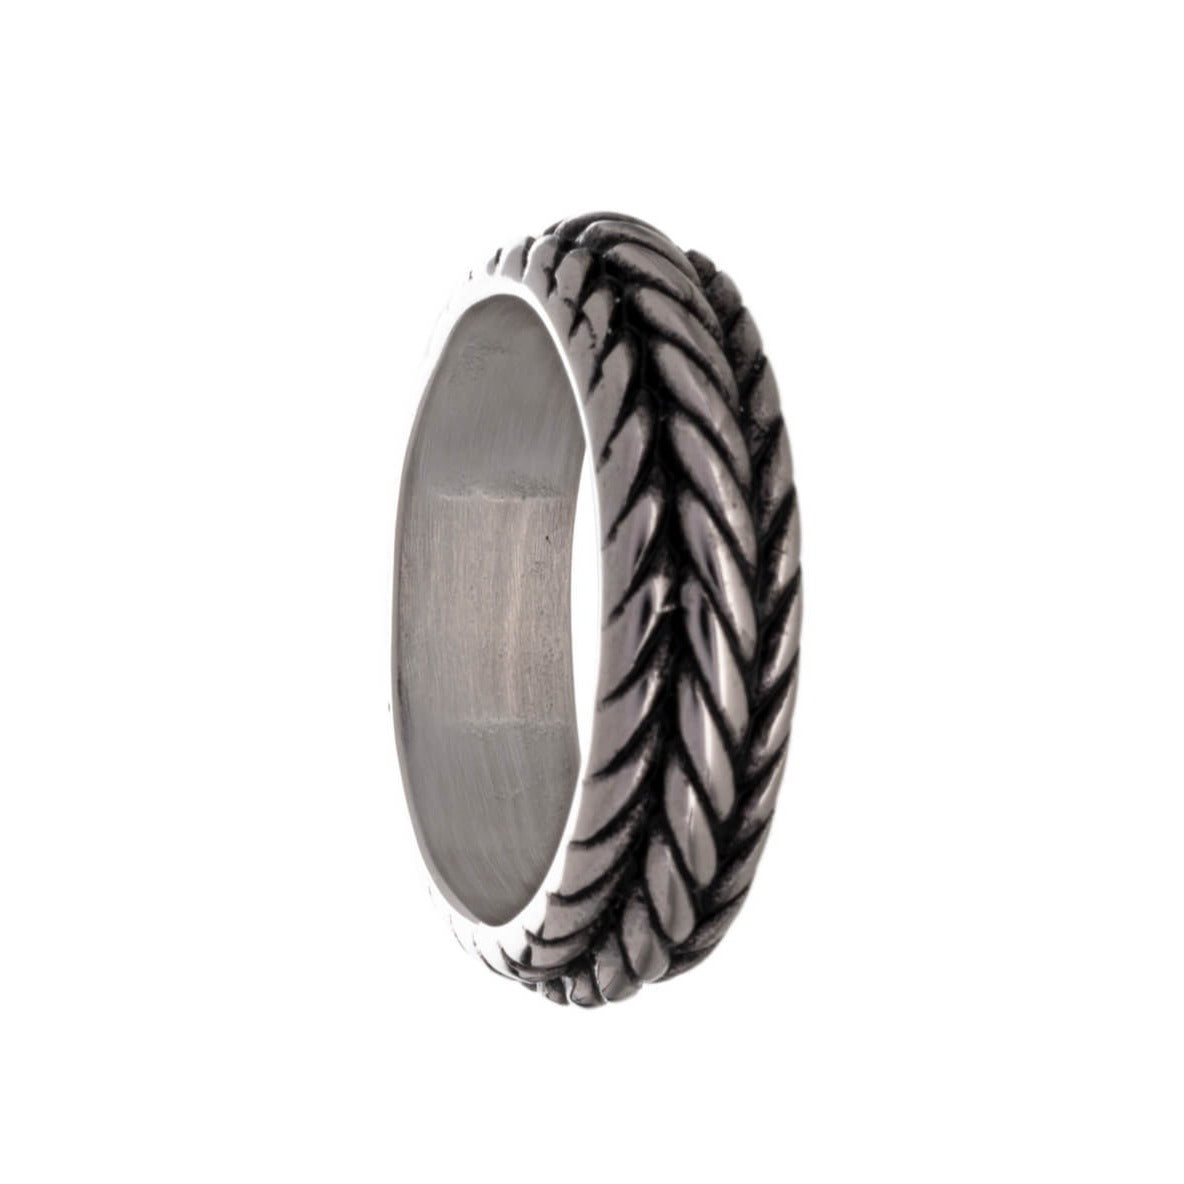 Shaped braided steel ring